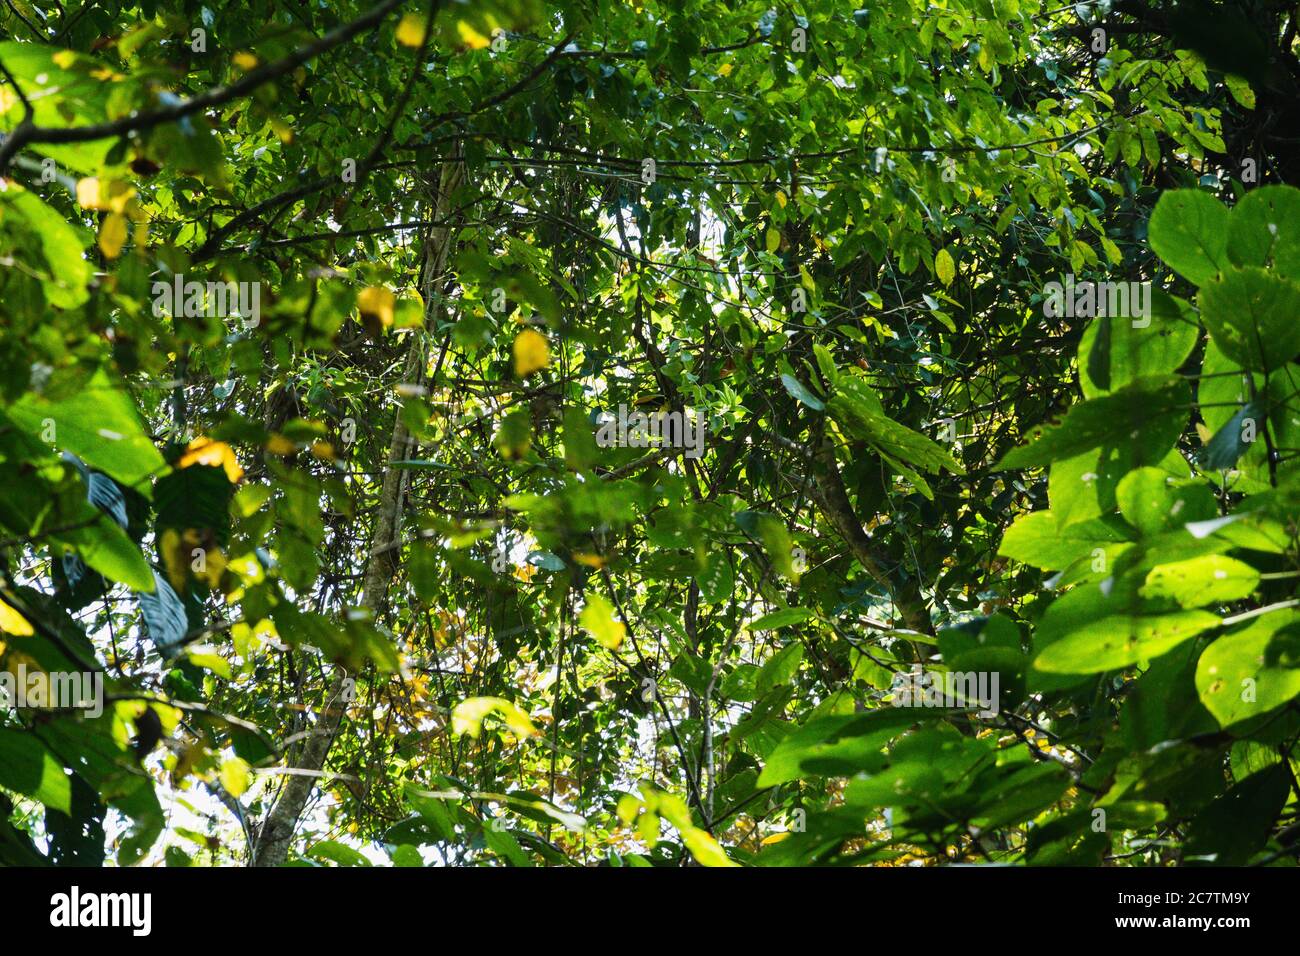 A tucan perched in a tree surrounded by green leaves in Puerto Viejo, Costa Rica Stock Photo